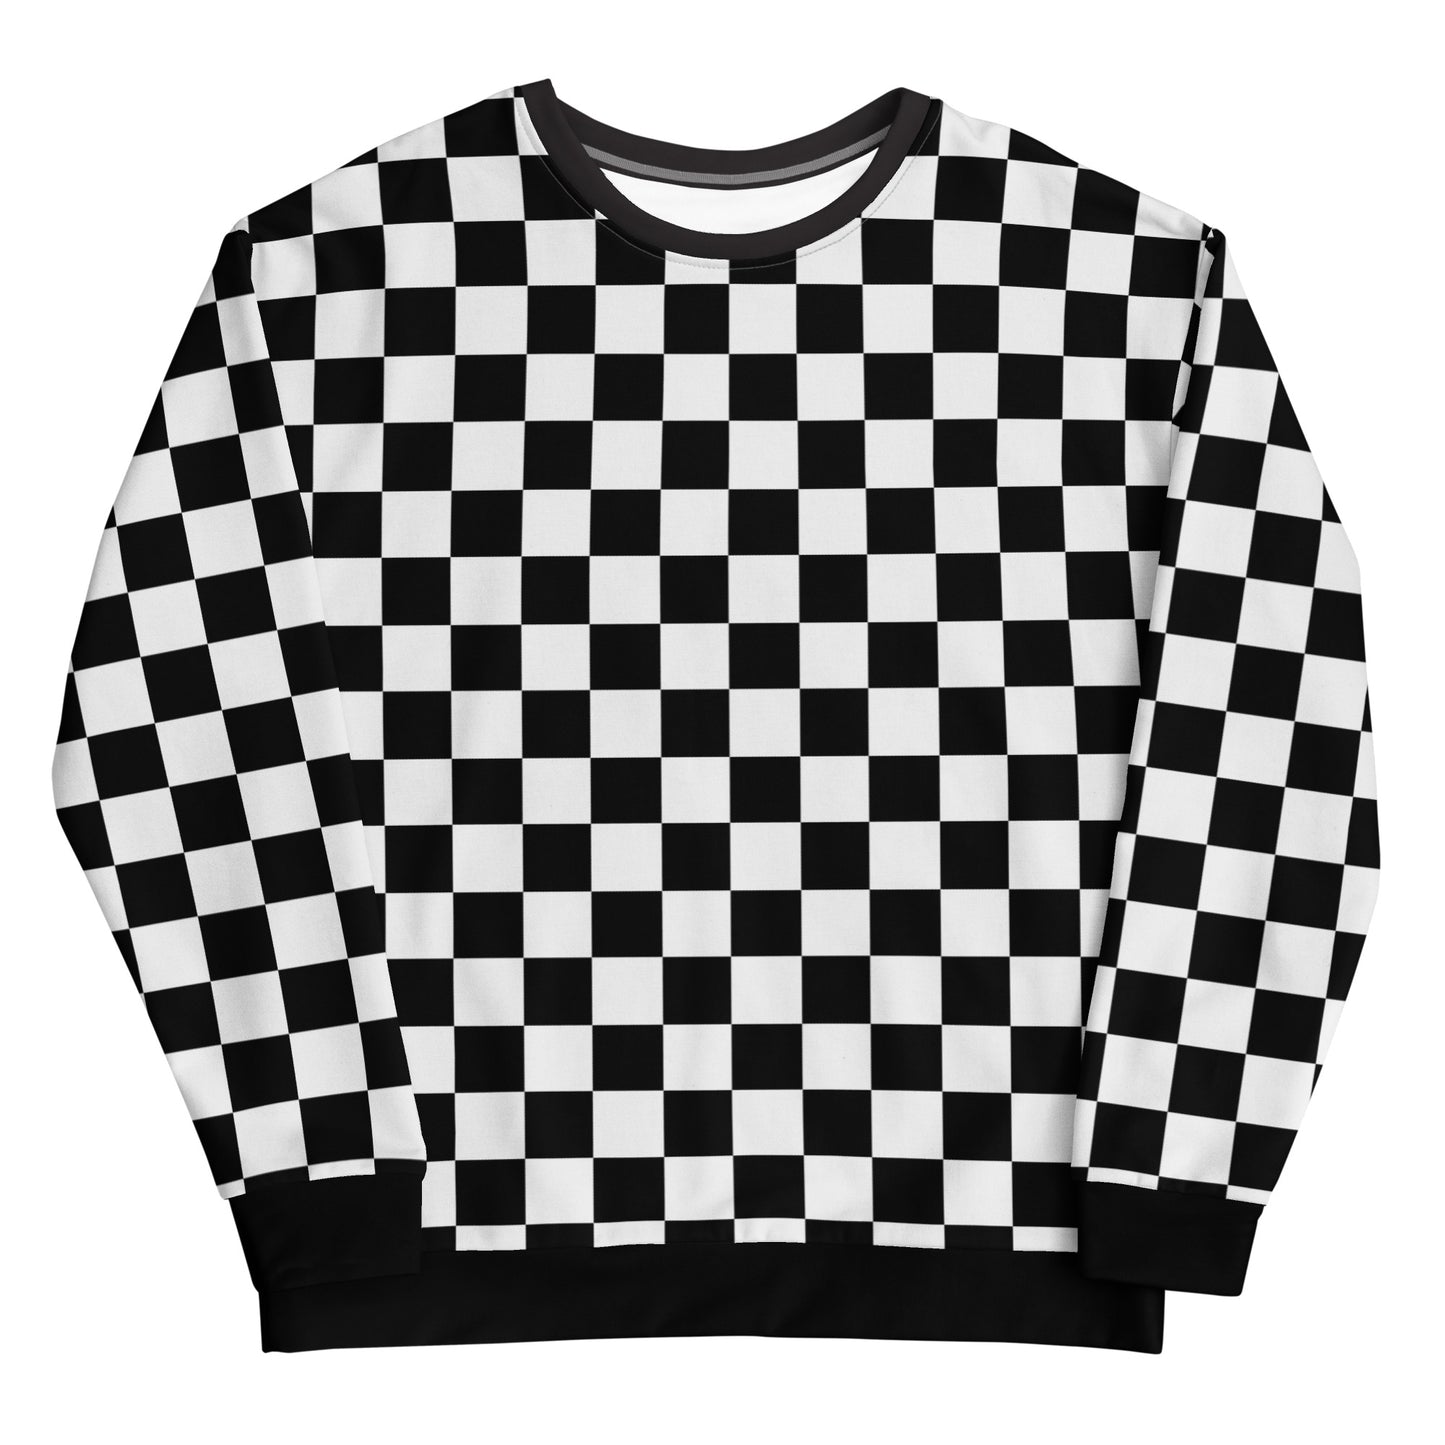 Checkmate - Inspired By Harry Styles - Sustainably Made Sweatshirt